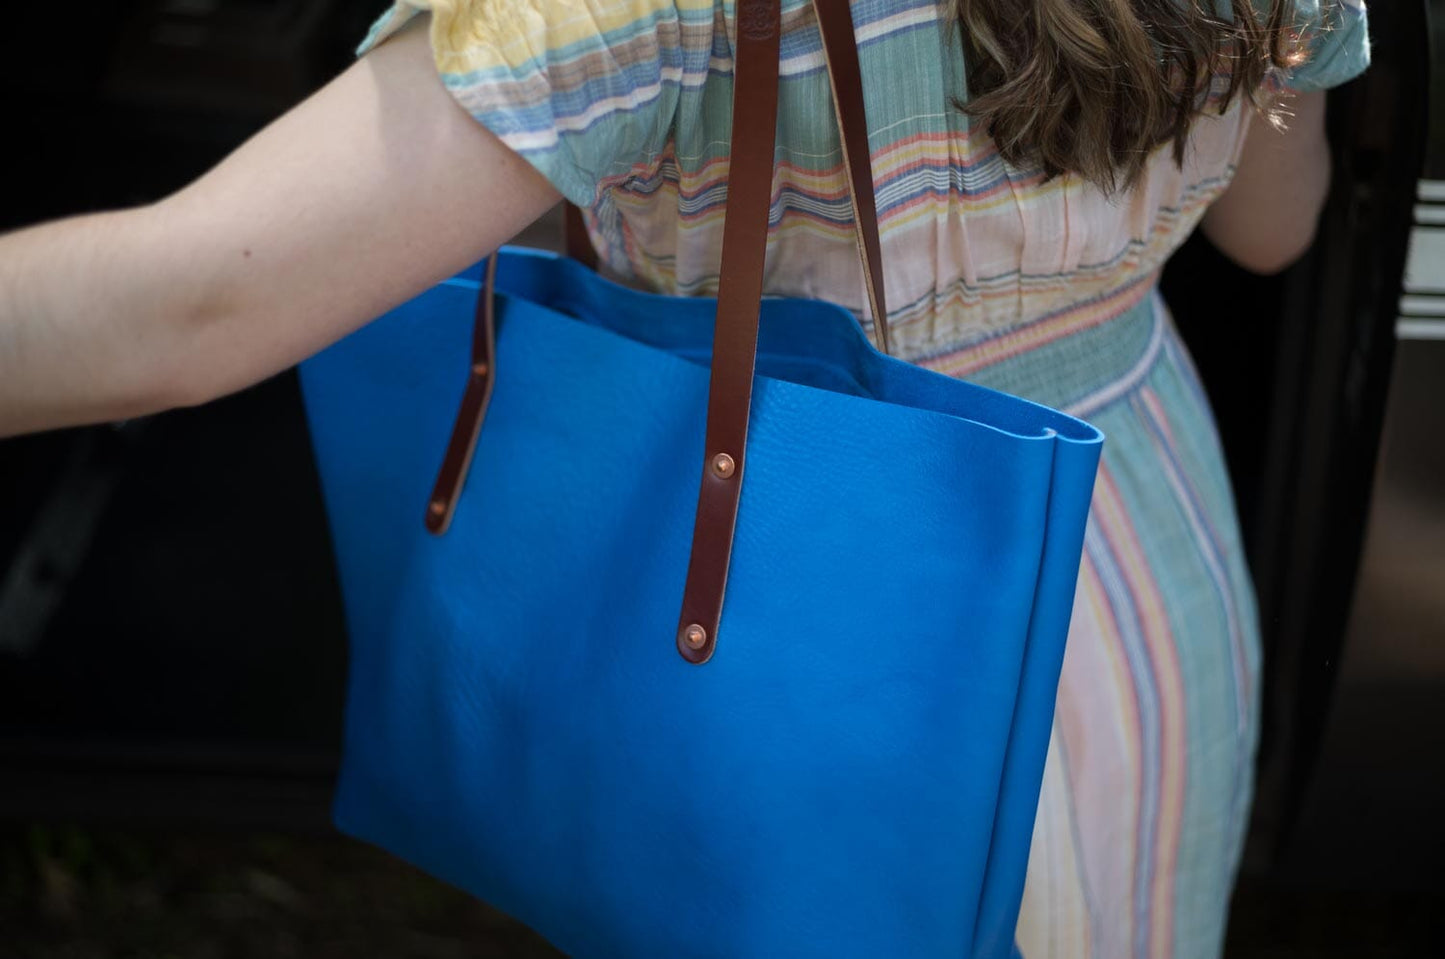 AVERY LEATHER TOTE BAG - LARGE - OCEAN BLUE